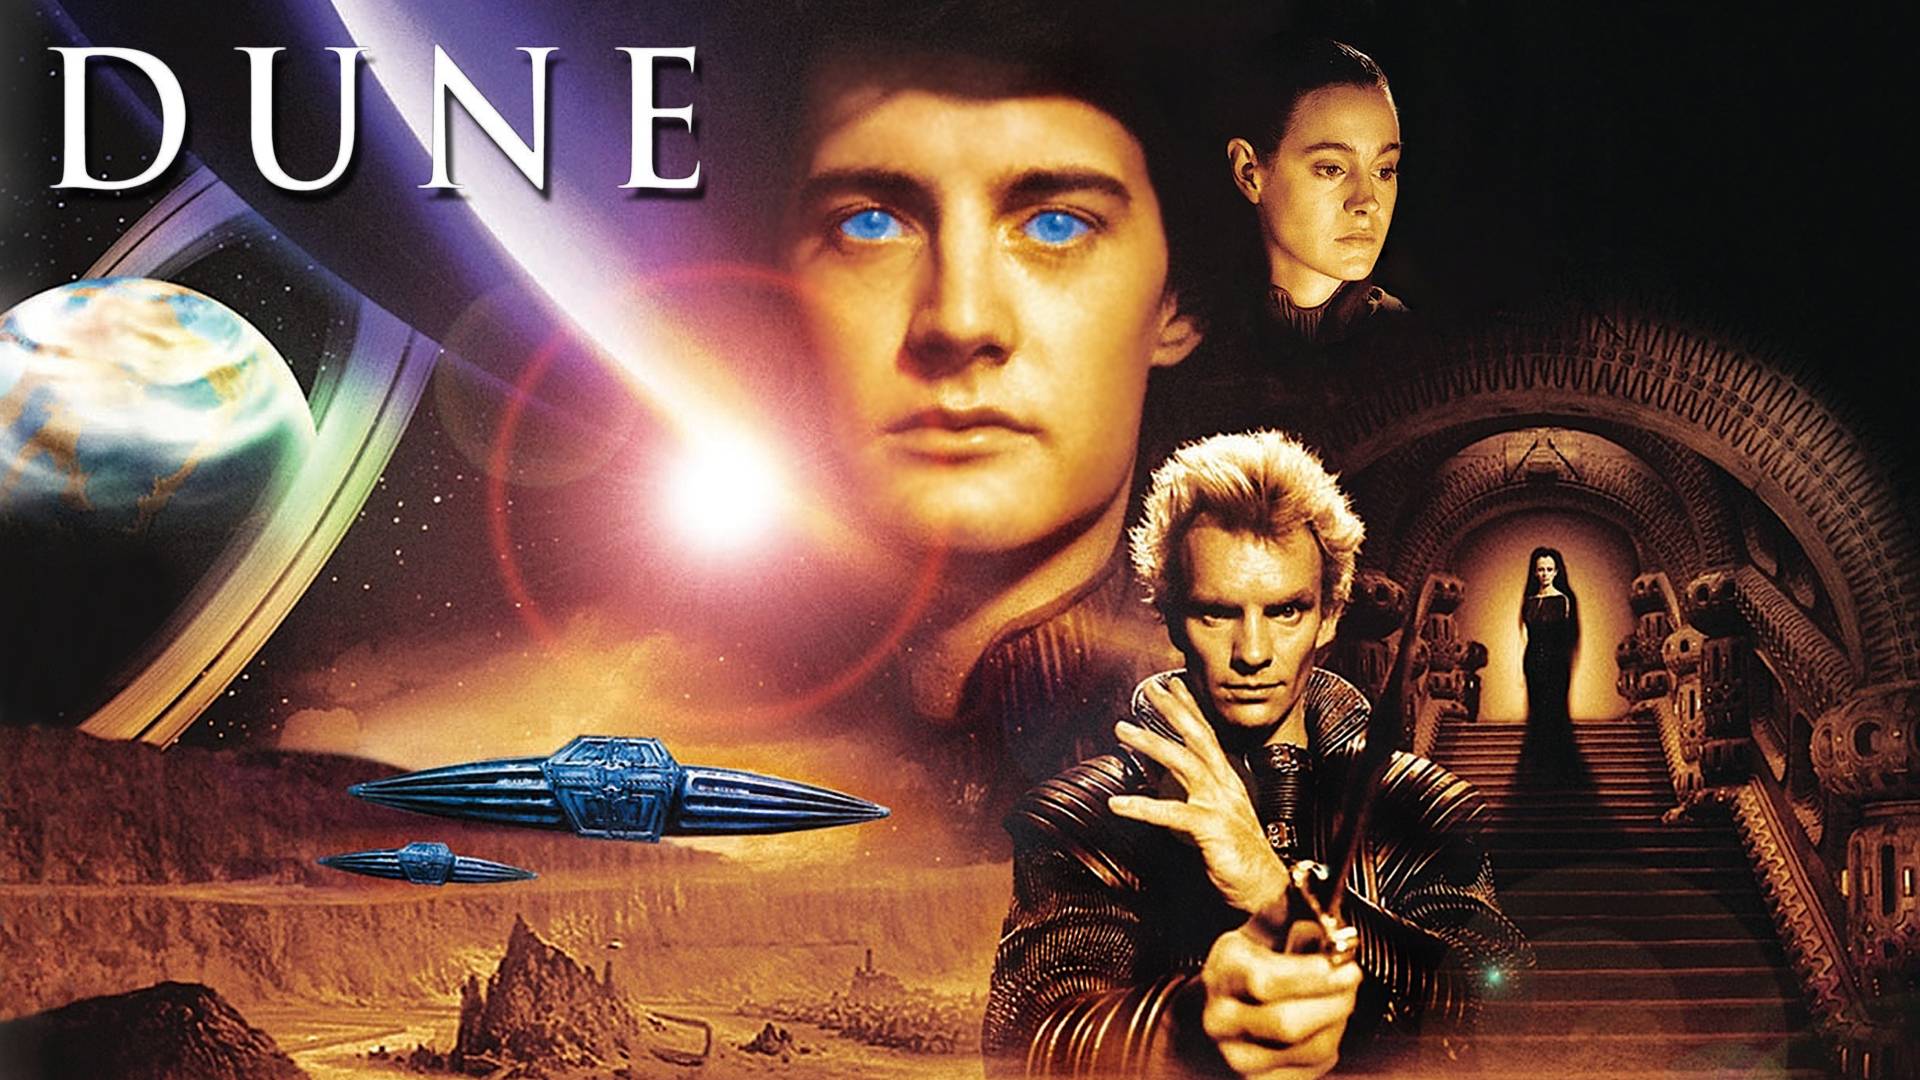 Dune Wallpaper For Is A American